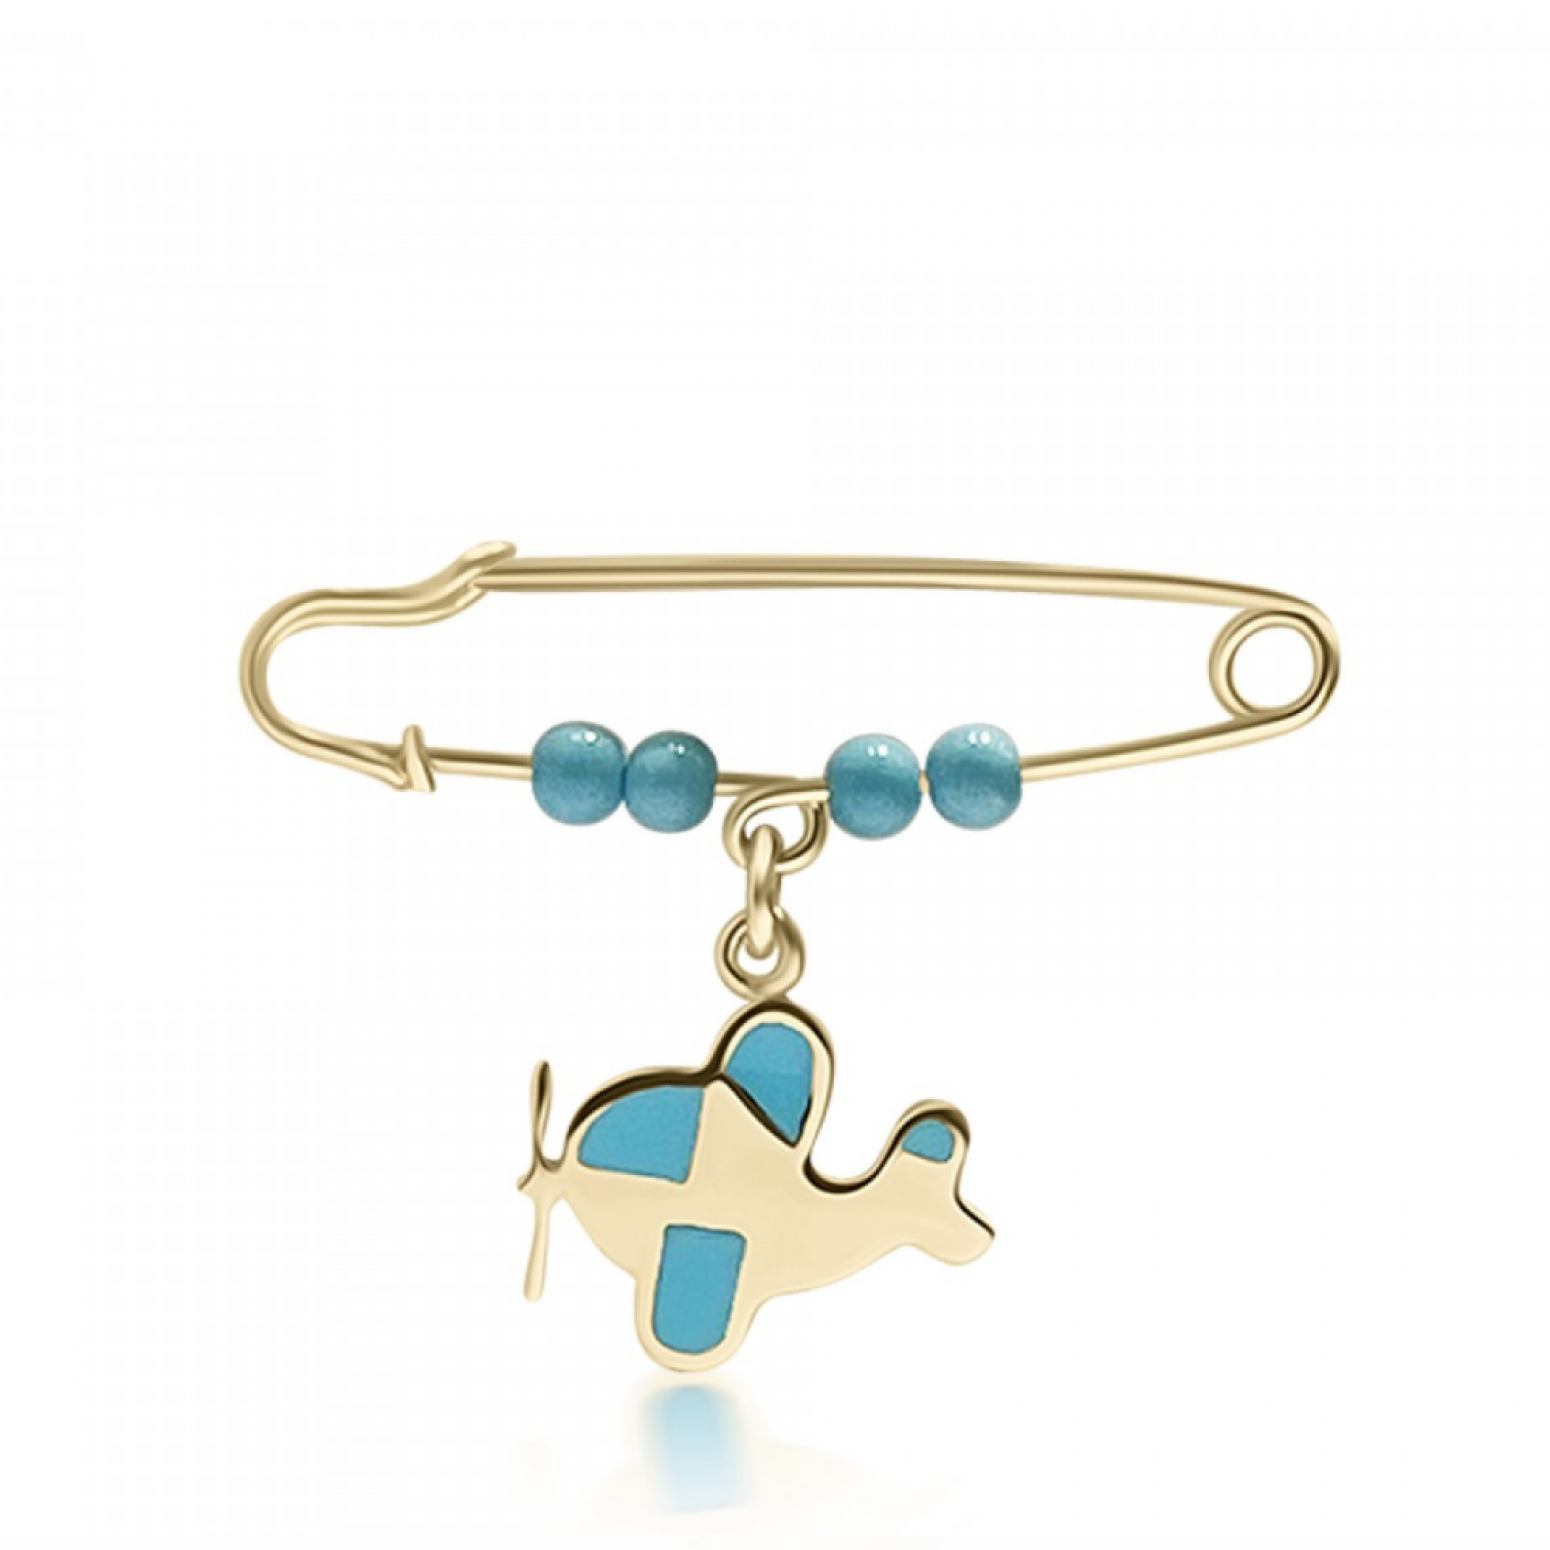 Babies pin K9 gold with airplane, turquoise and enamel, pf0188 BABIES Κοσμηματα - chrilia.gr